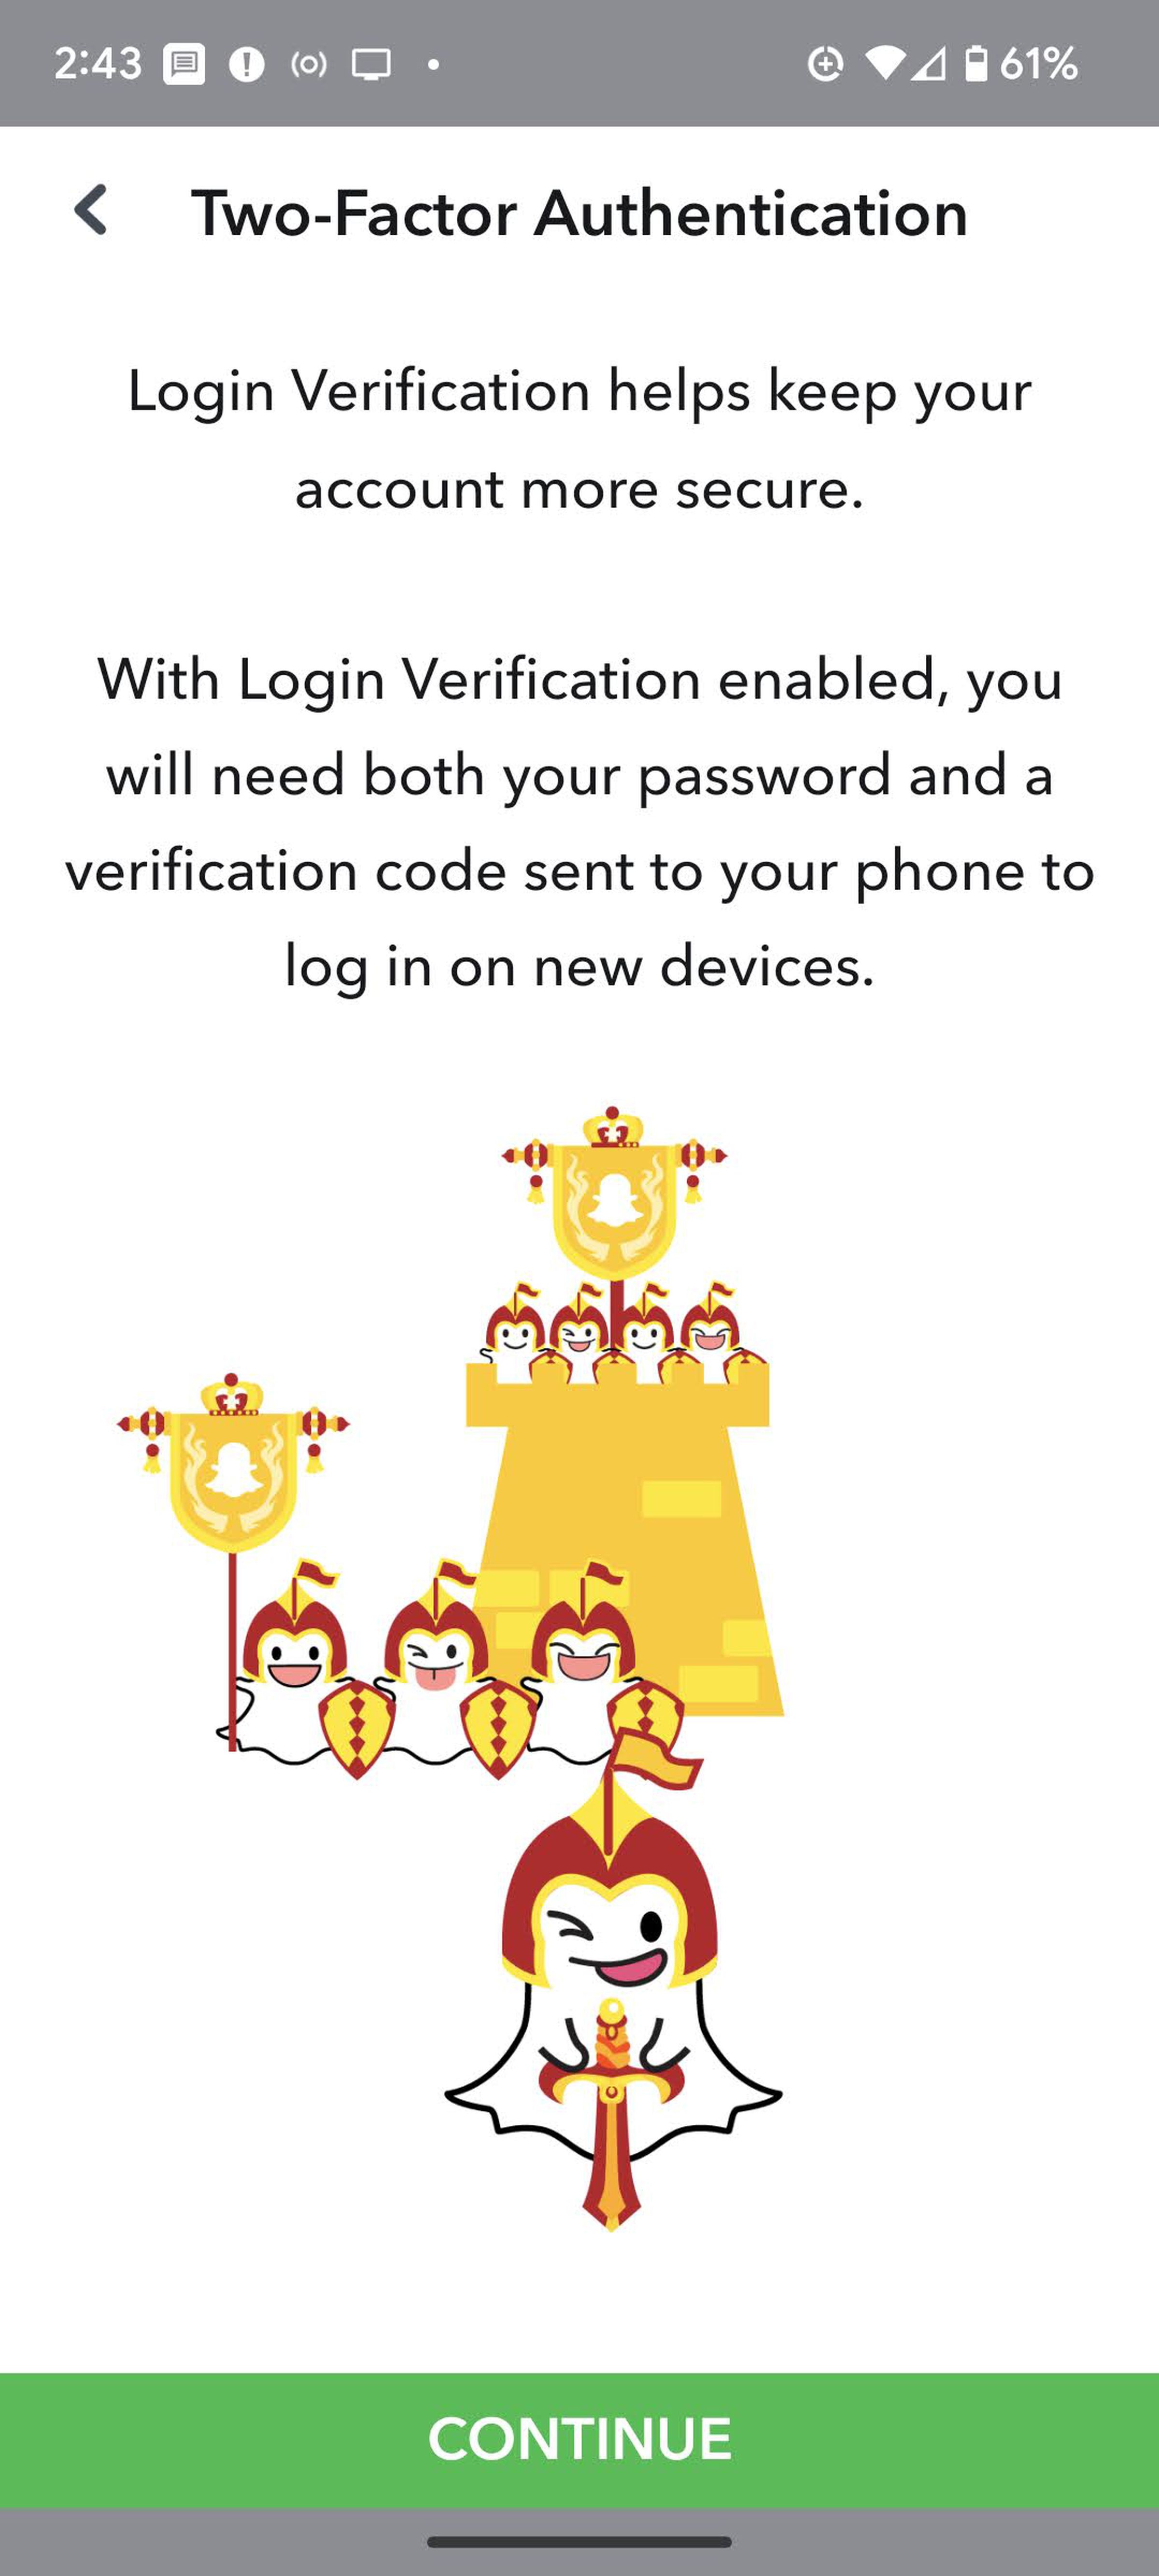 Snapchat page with Two-Factor Authentication on top, a short explanation, and then a drawing showing several snapchat ghost-looking characters.